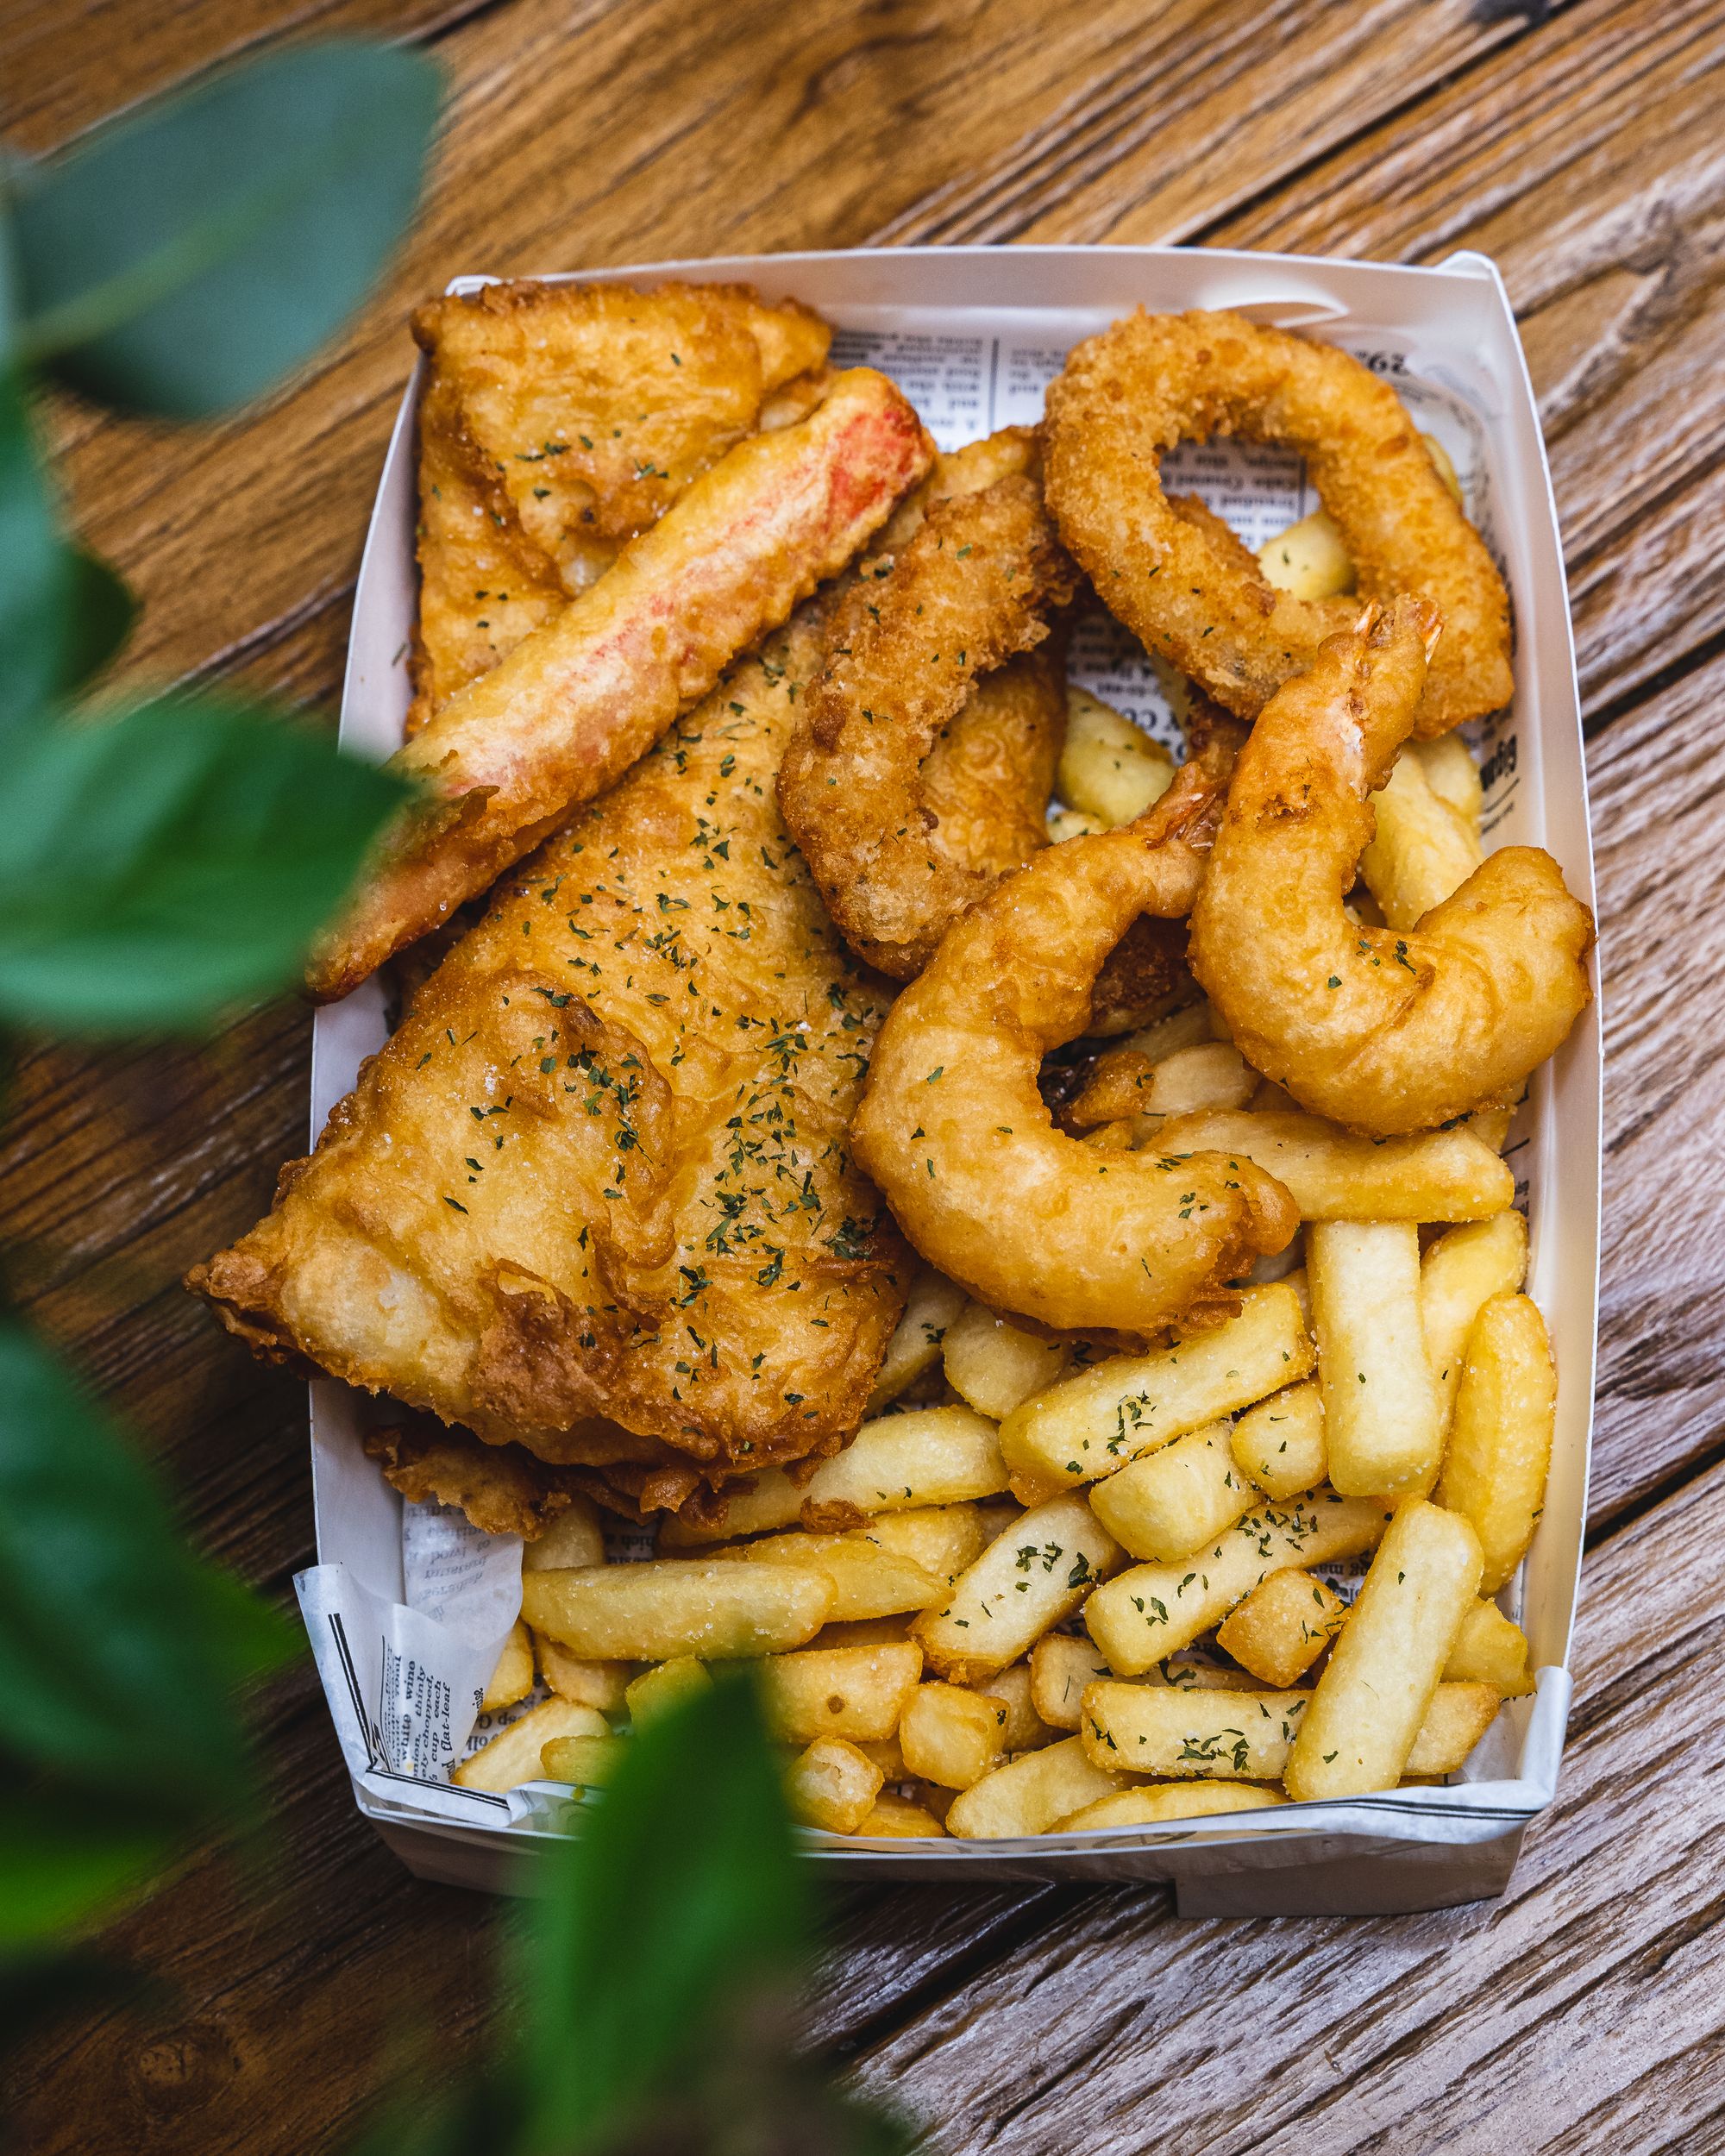 Fish and chips in a square box